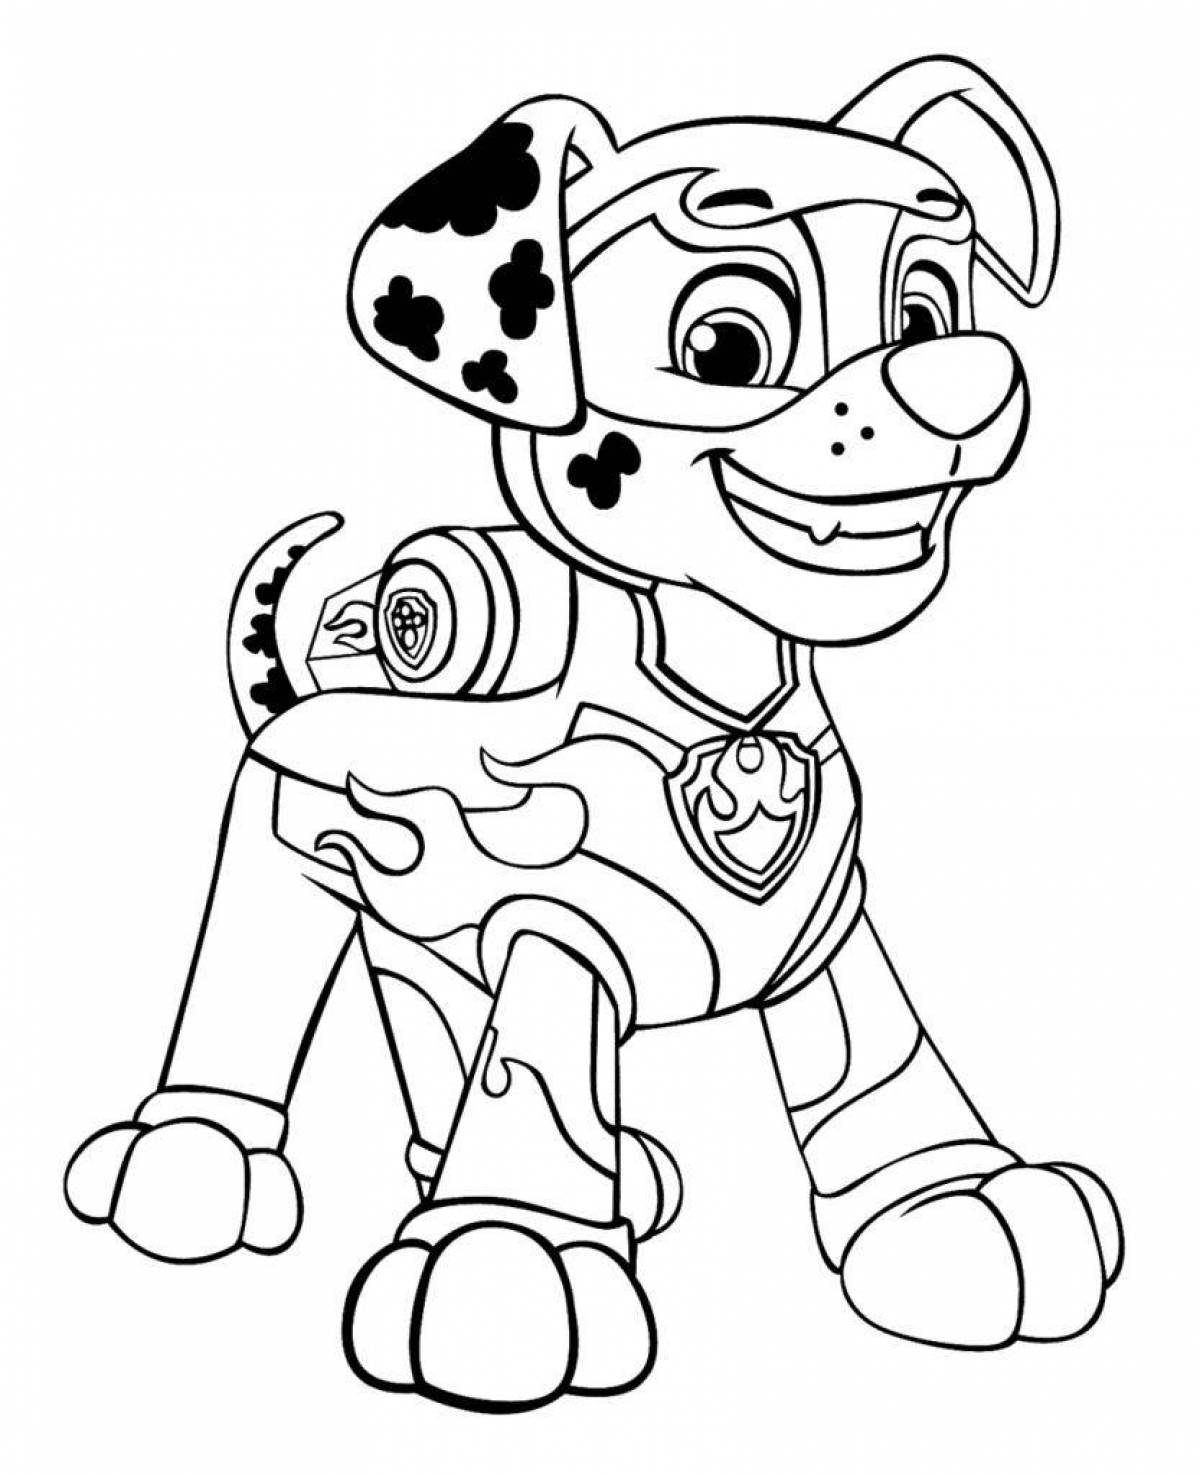 Blessed Everest puppy coloring page